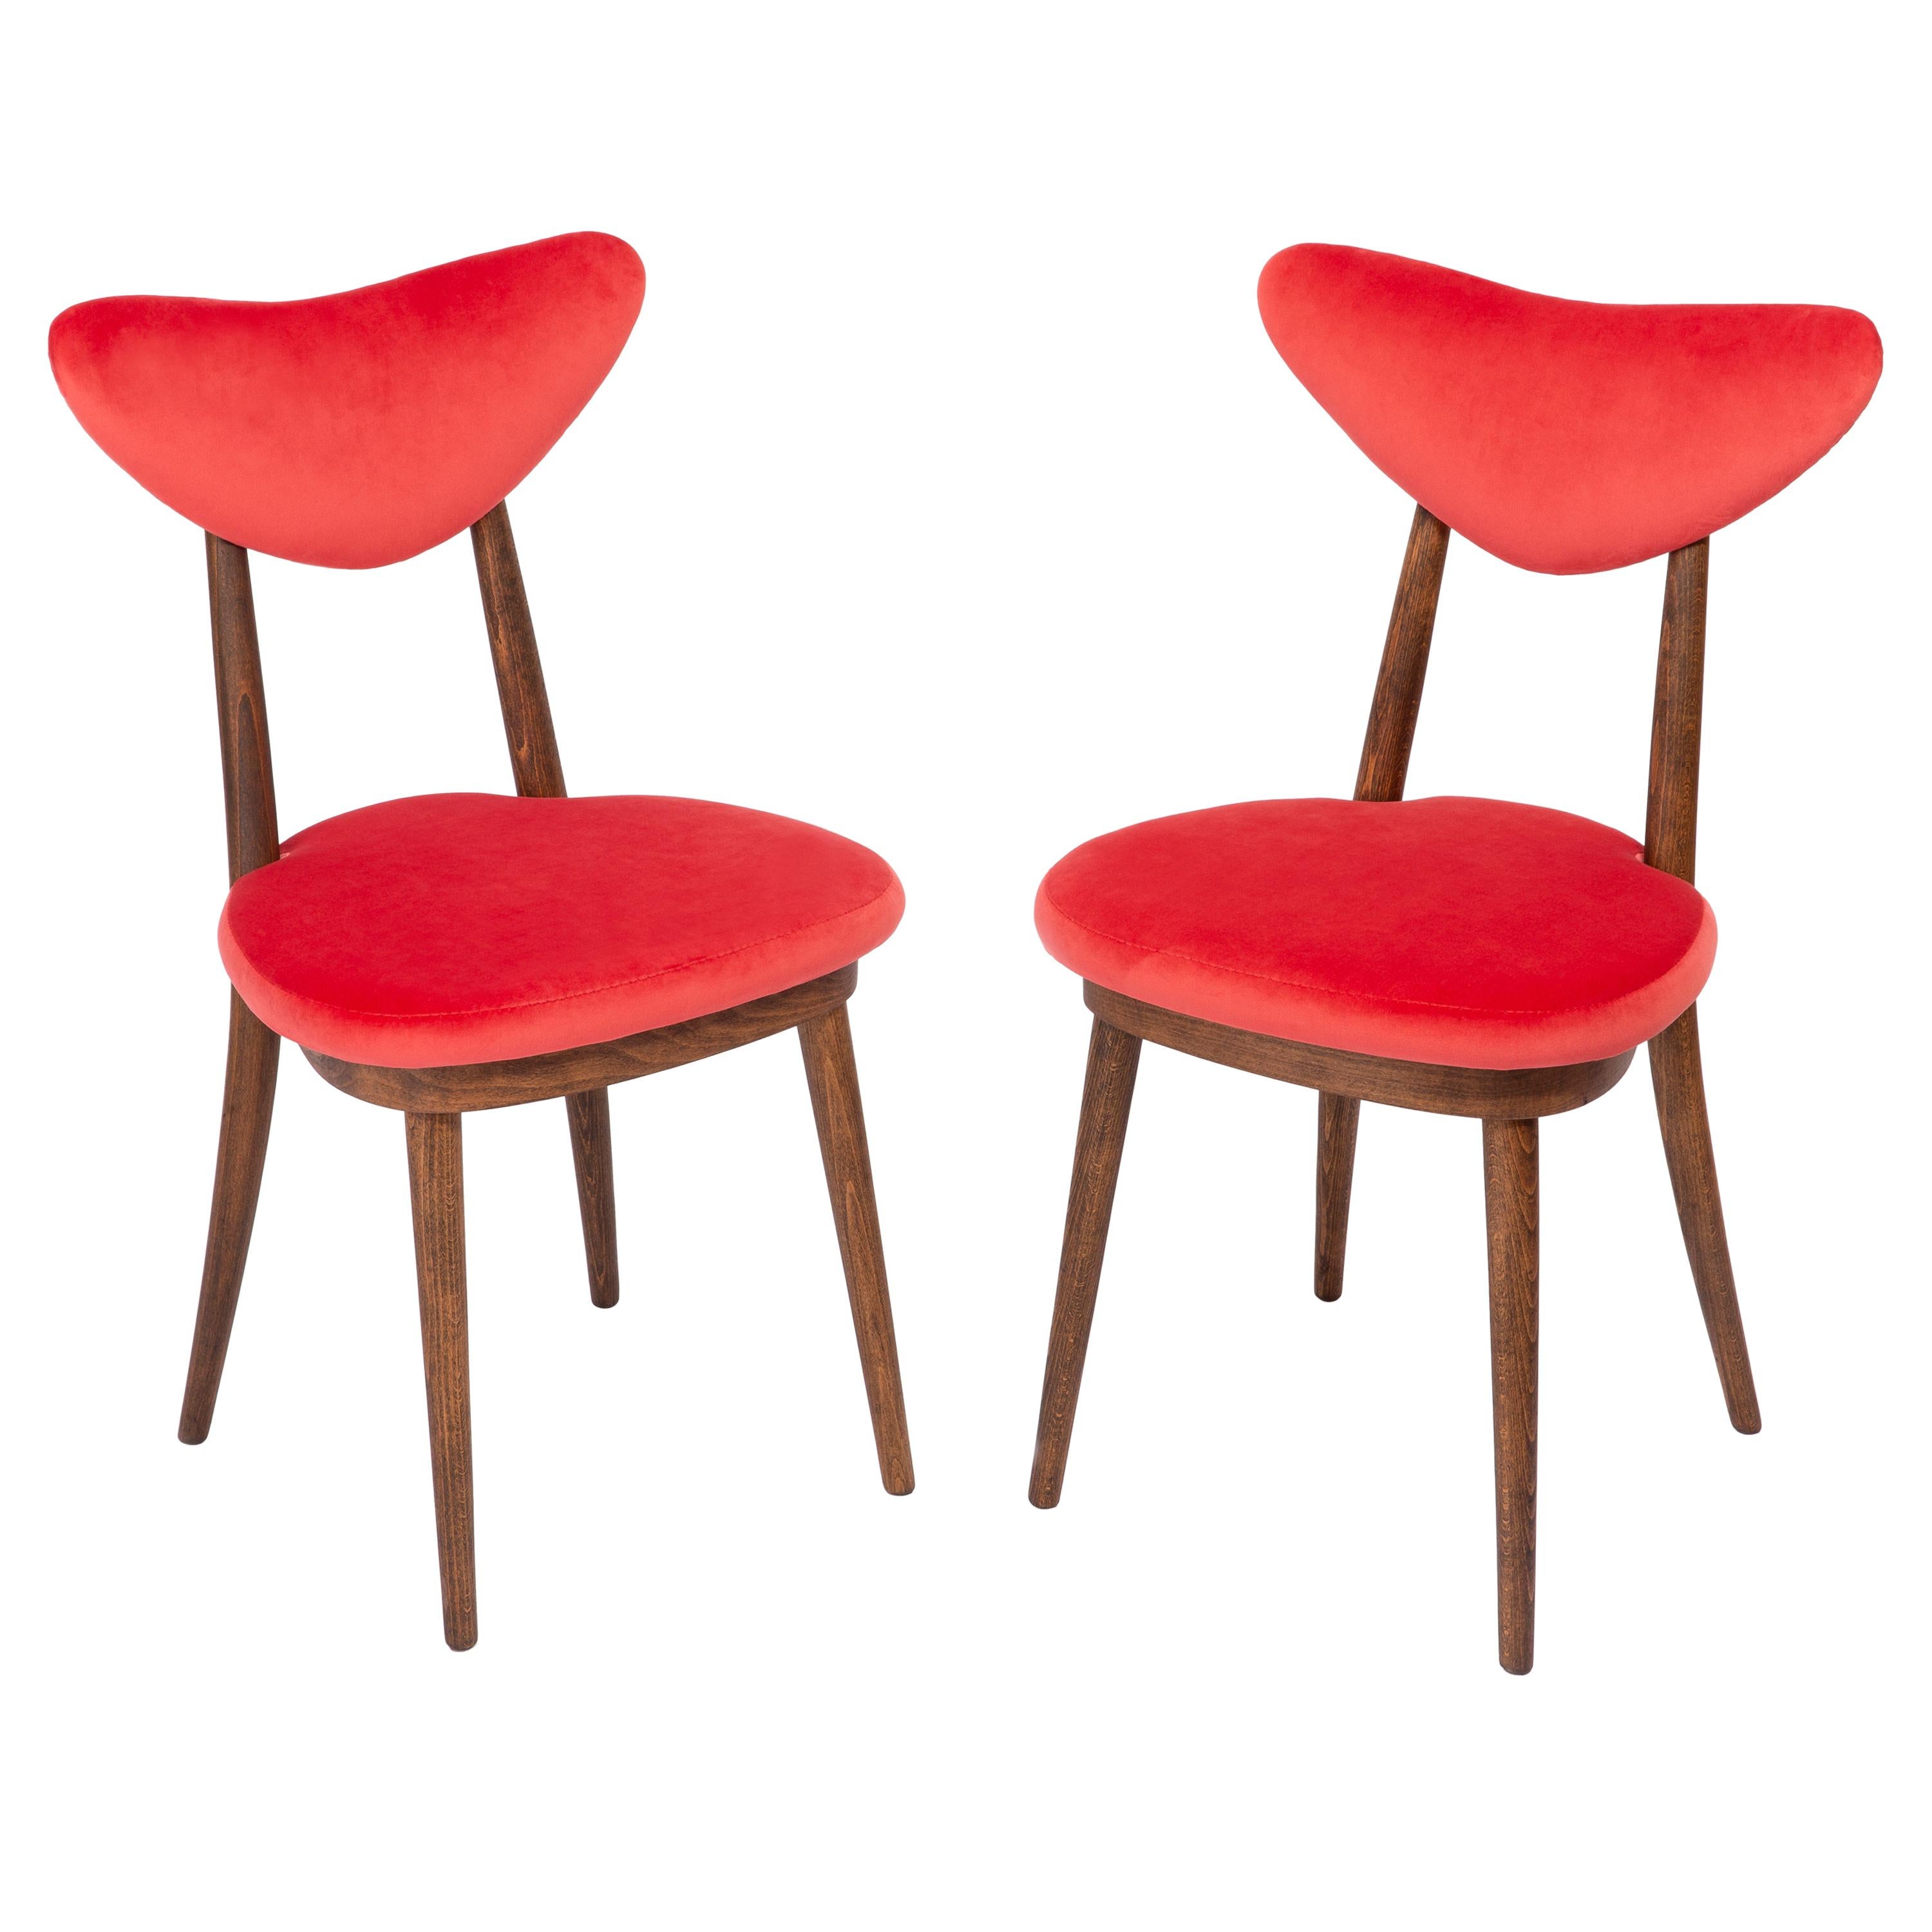 Mid-Century Modern Pair of Red Heart Chairs, Poland, 1960s For Sale